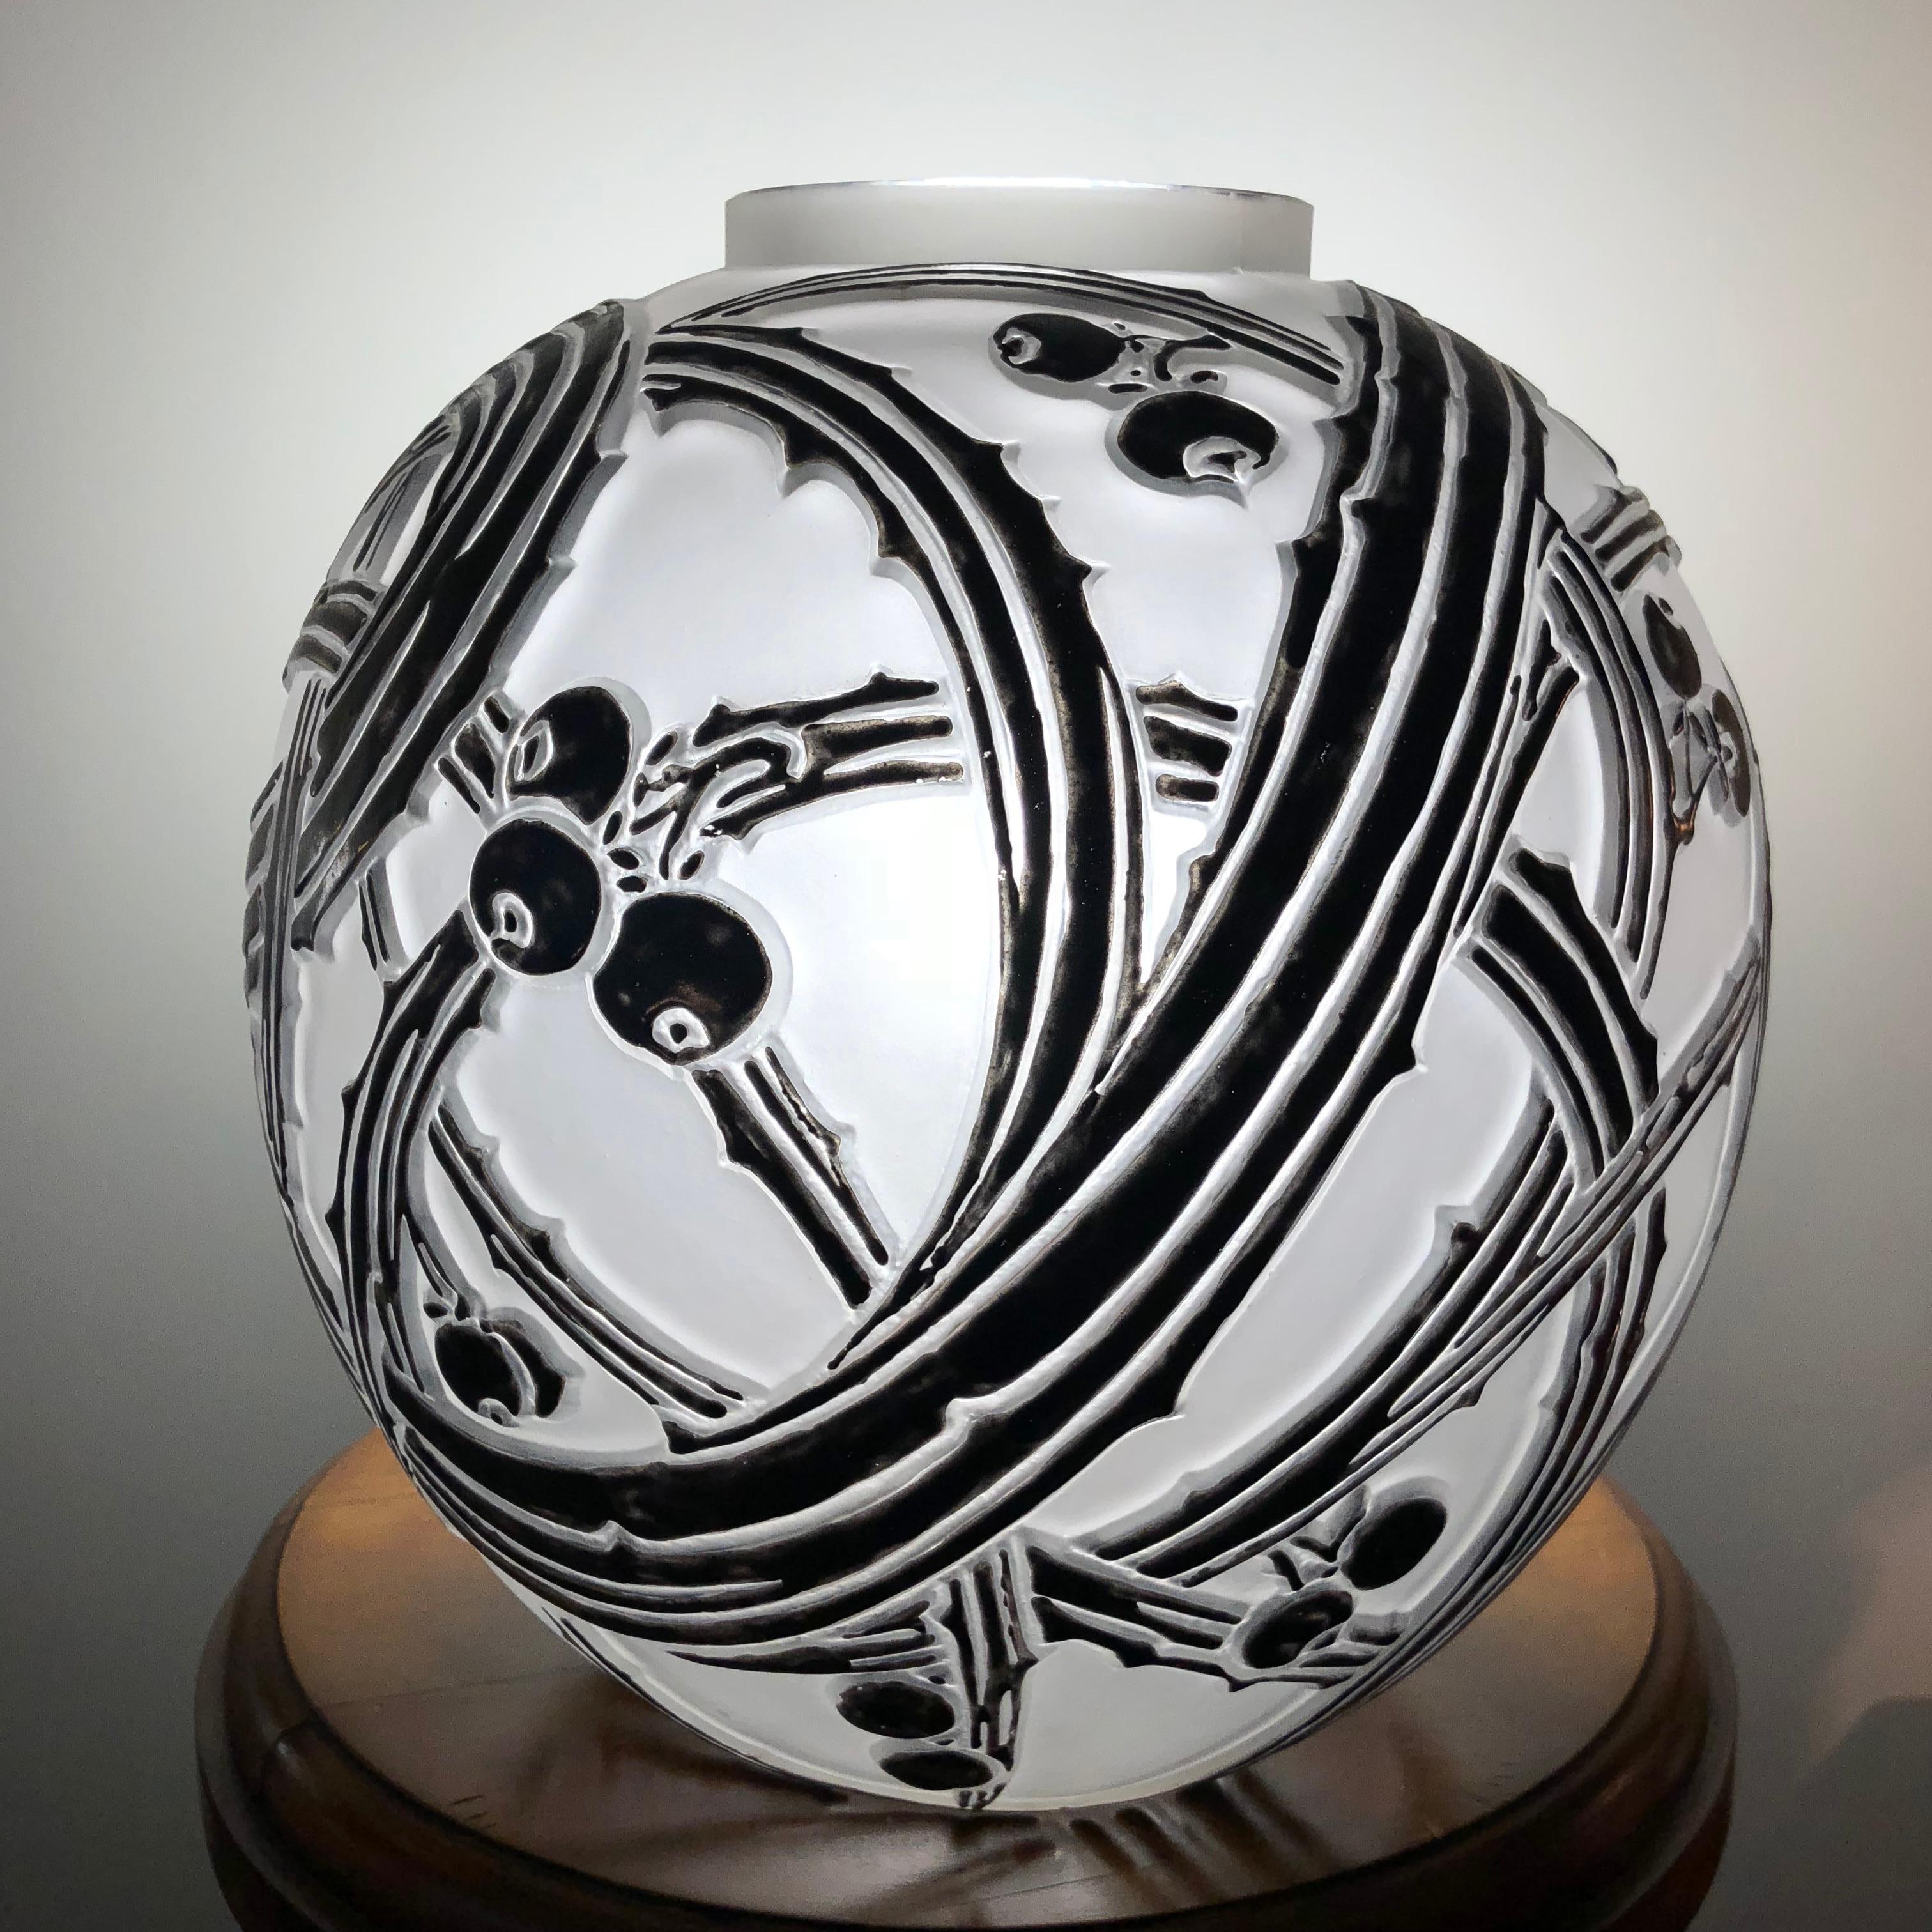 Art Deco 1924 Rene Lalique Baies Vase in Frosted Glass with Shinny Original Black Enamel